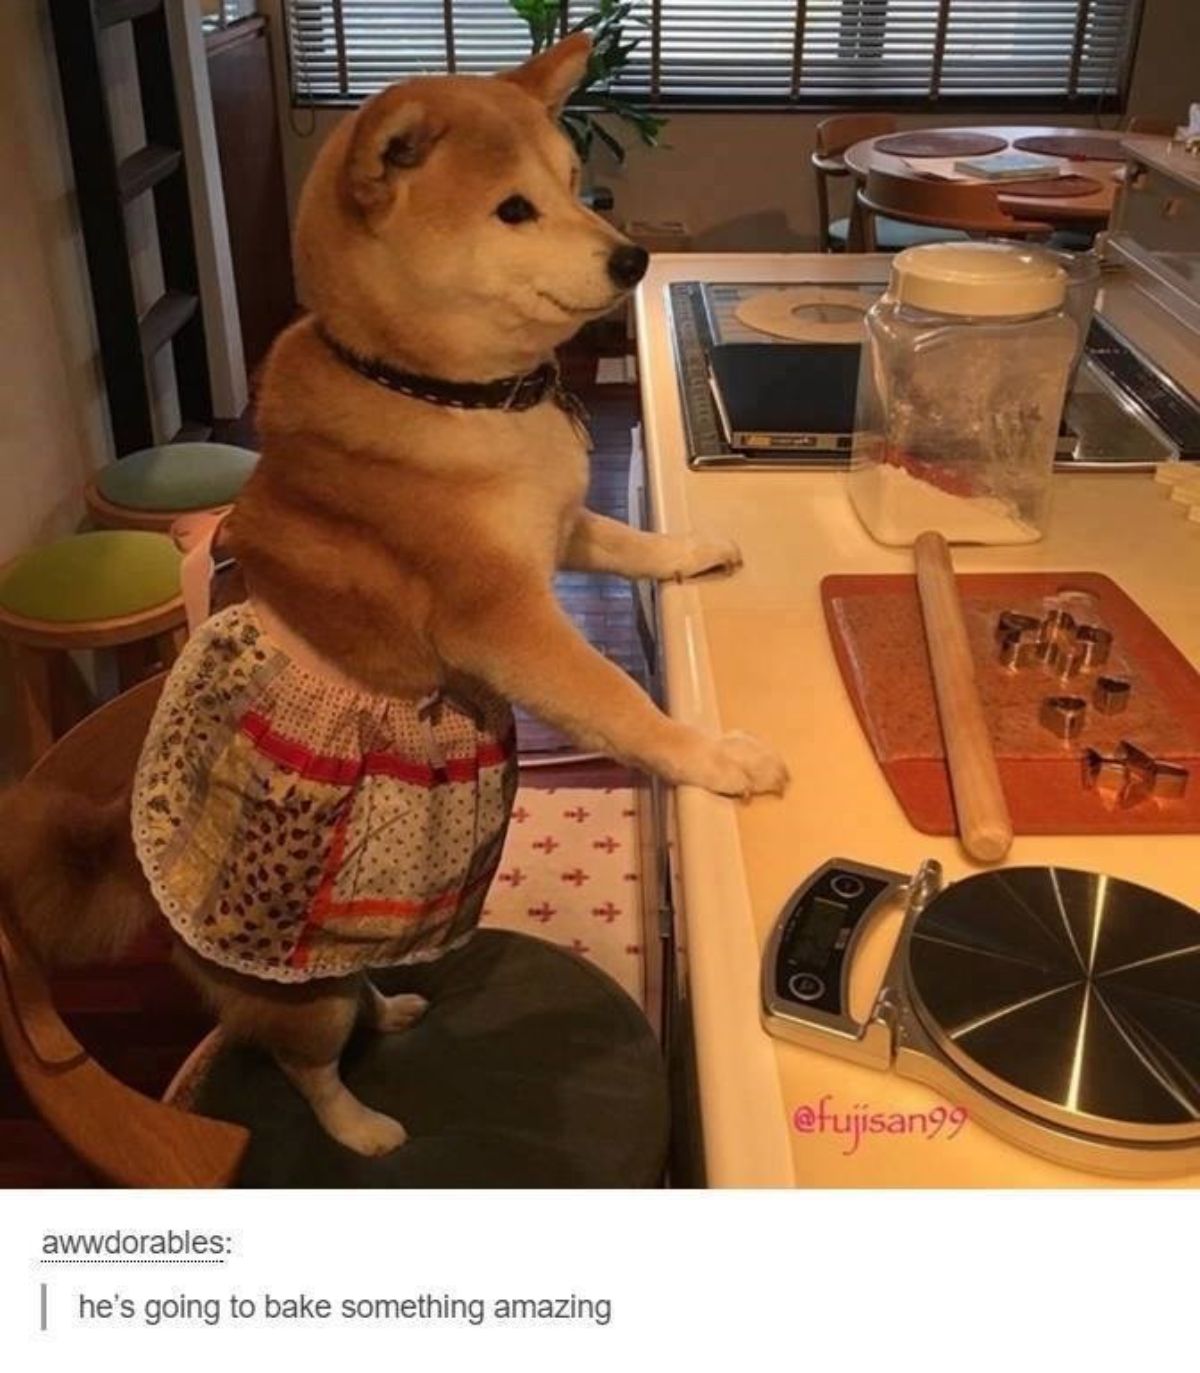 brown and white shiba inu wearing an apron on hind legs with front paws on counter with baking utensils